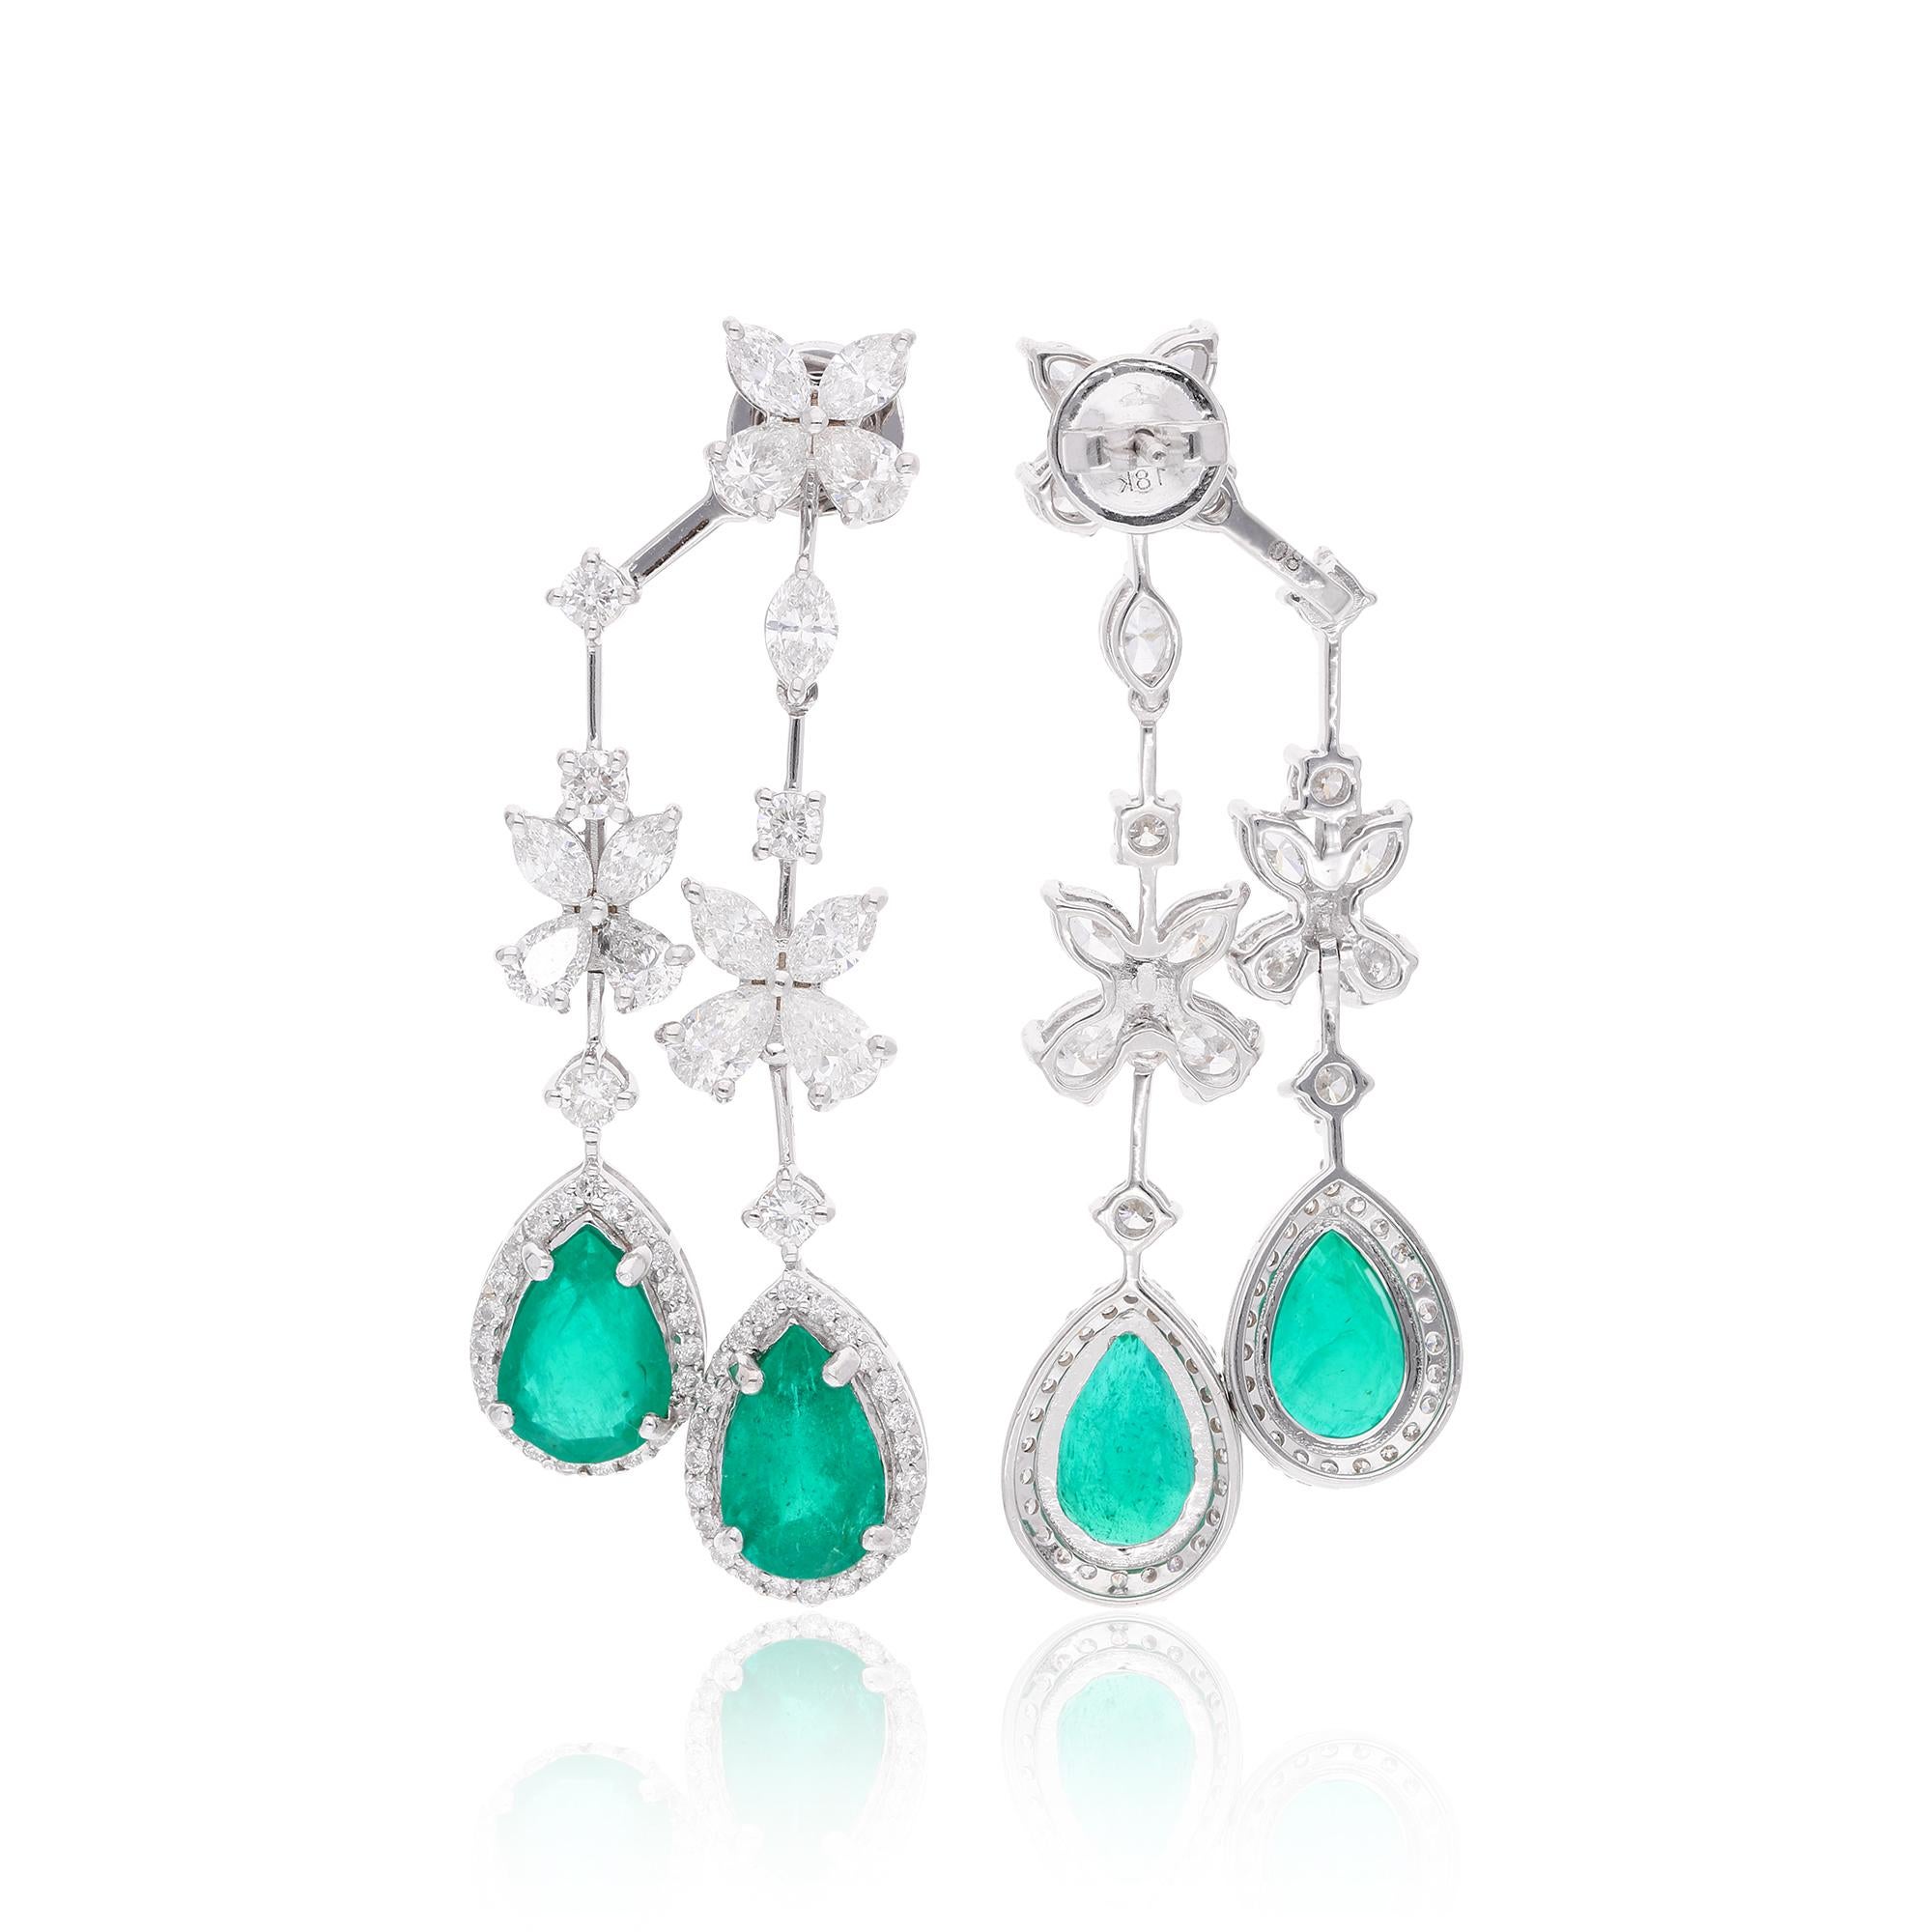 These Dainty Diamond Dangle Earrings with 5.48 ct. Genuine Diamonds & 6.95 ct. Zambian Emerald are a promise of perfection and purity. These earrings are set in 18k Solid White Gold. You can choose these earrings in 10k/14k/18k, Rose Gold/White